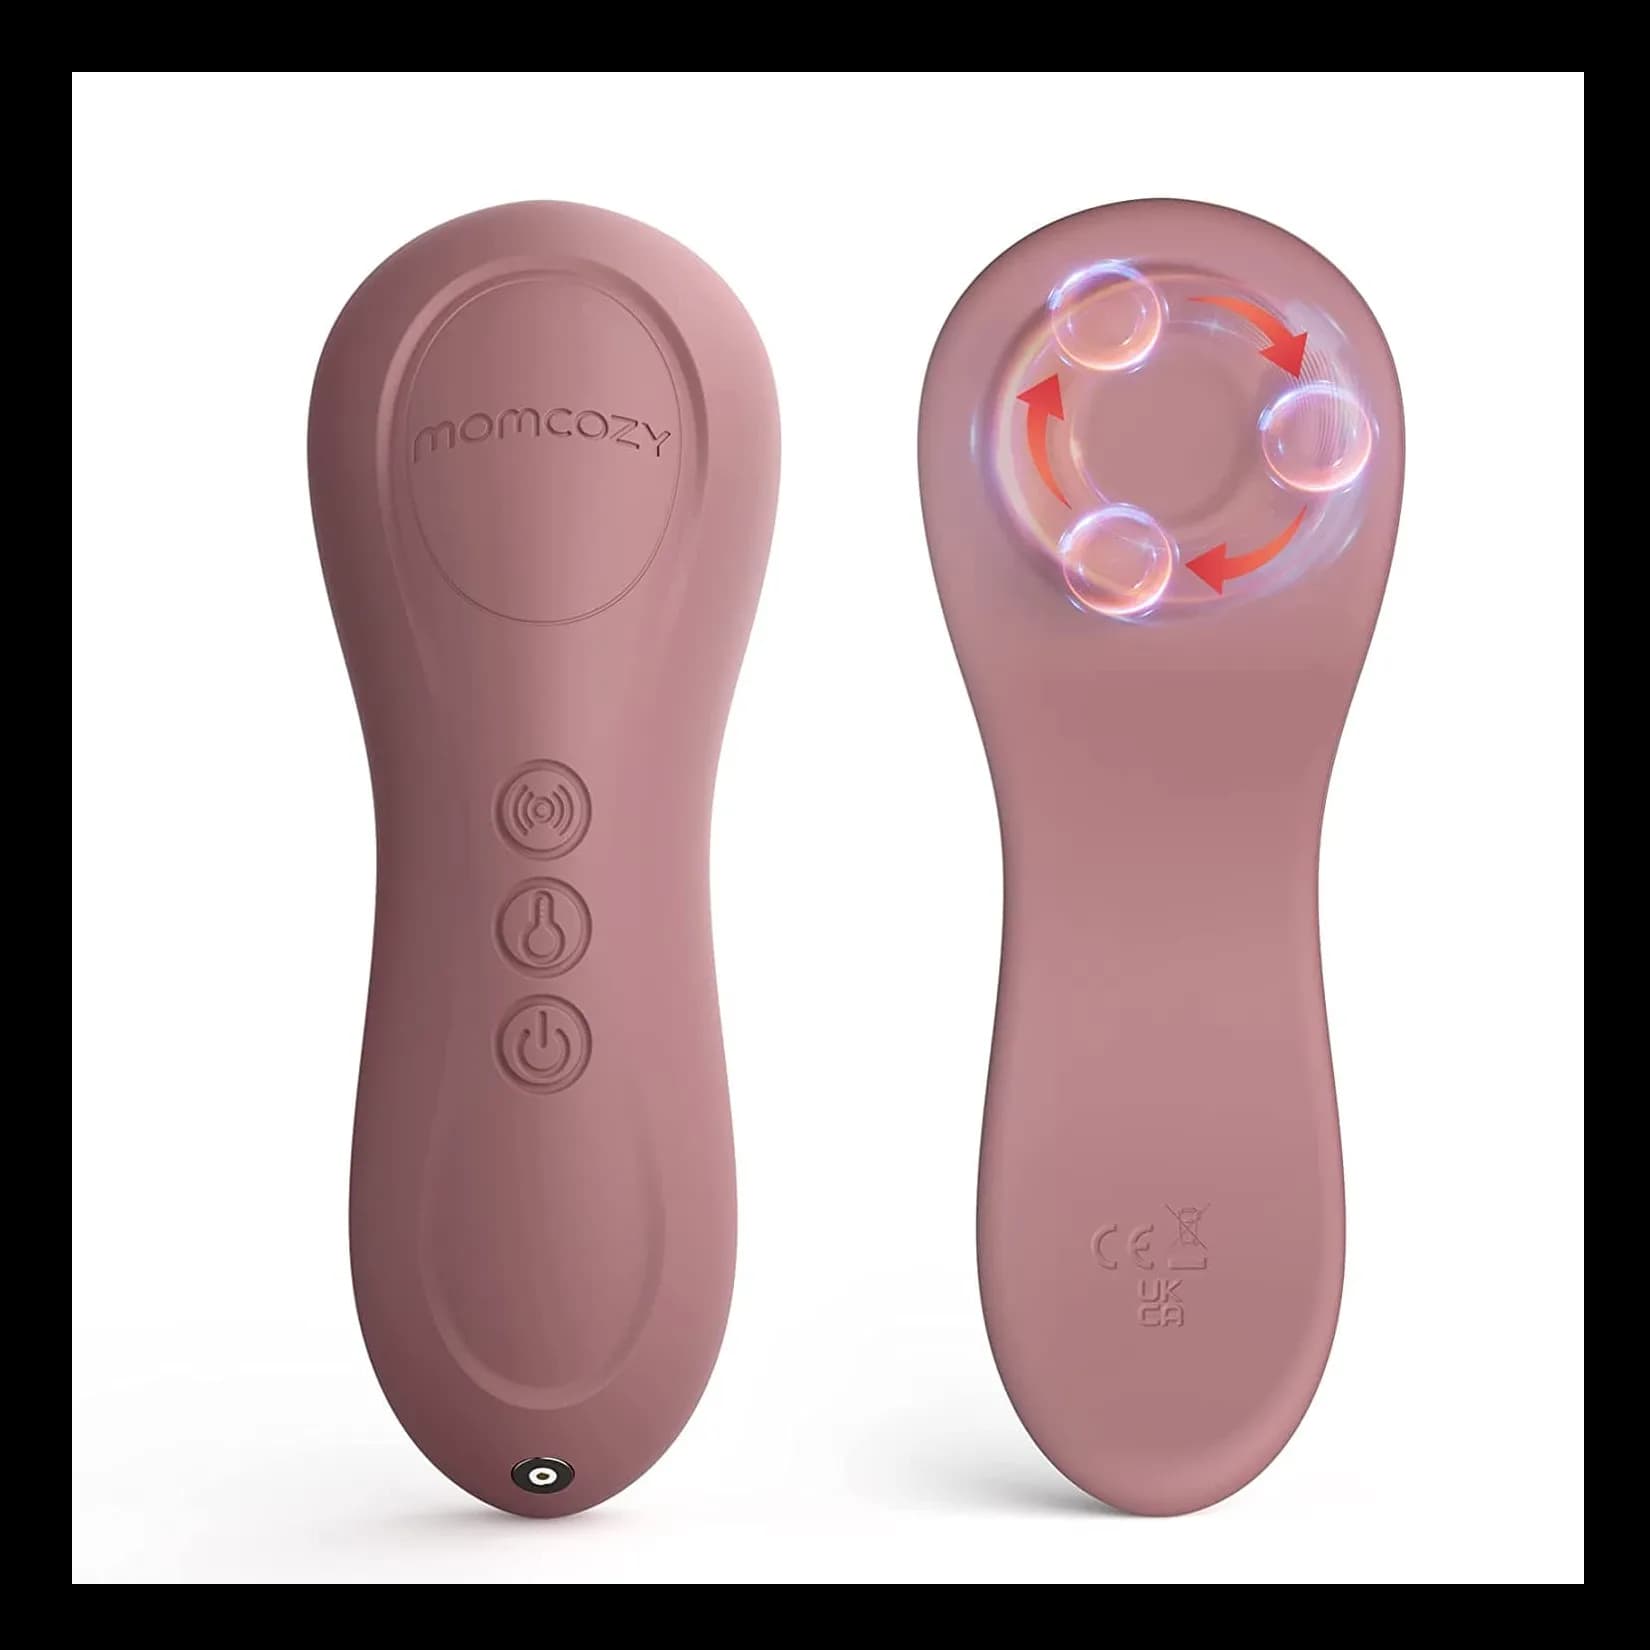 Momcozy Kneading Lactation Massager With Heat 3 In 1 For Clogged Ducts